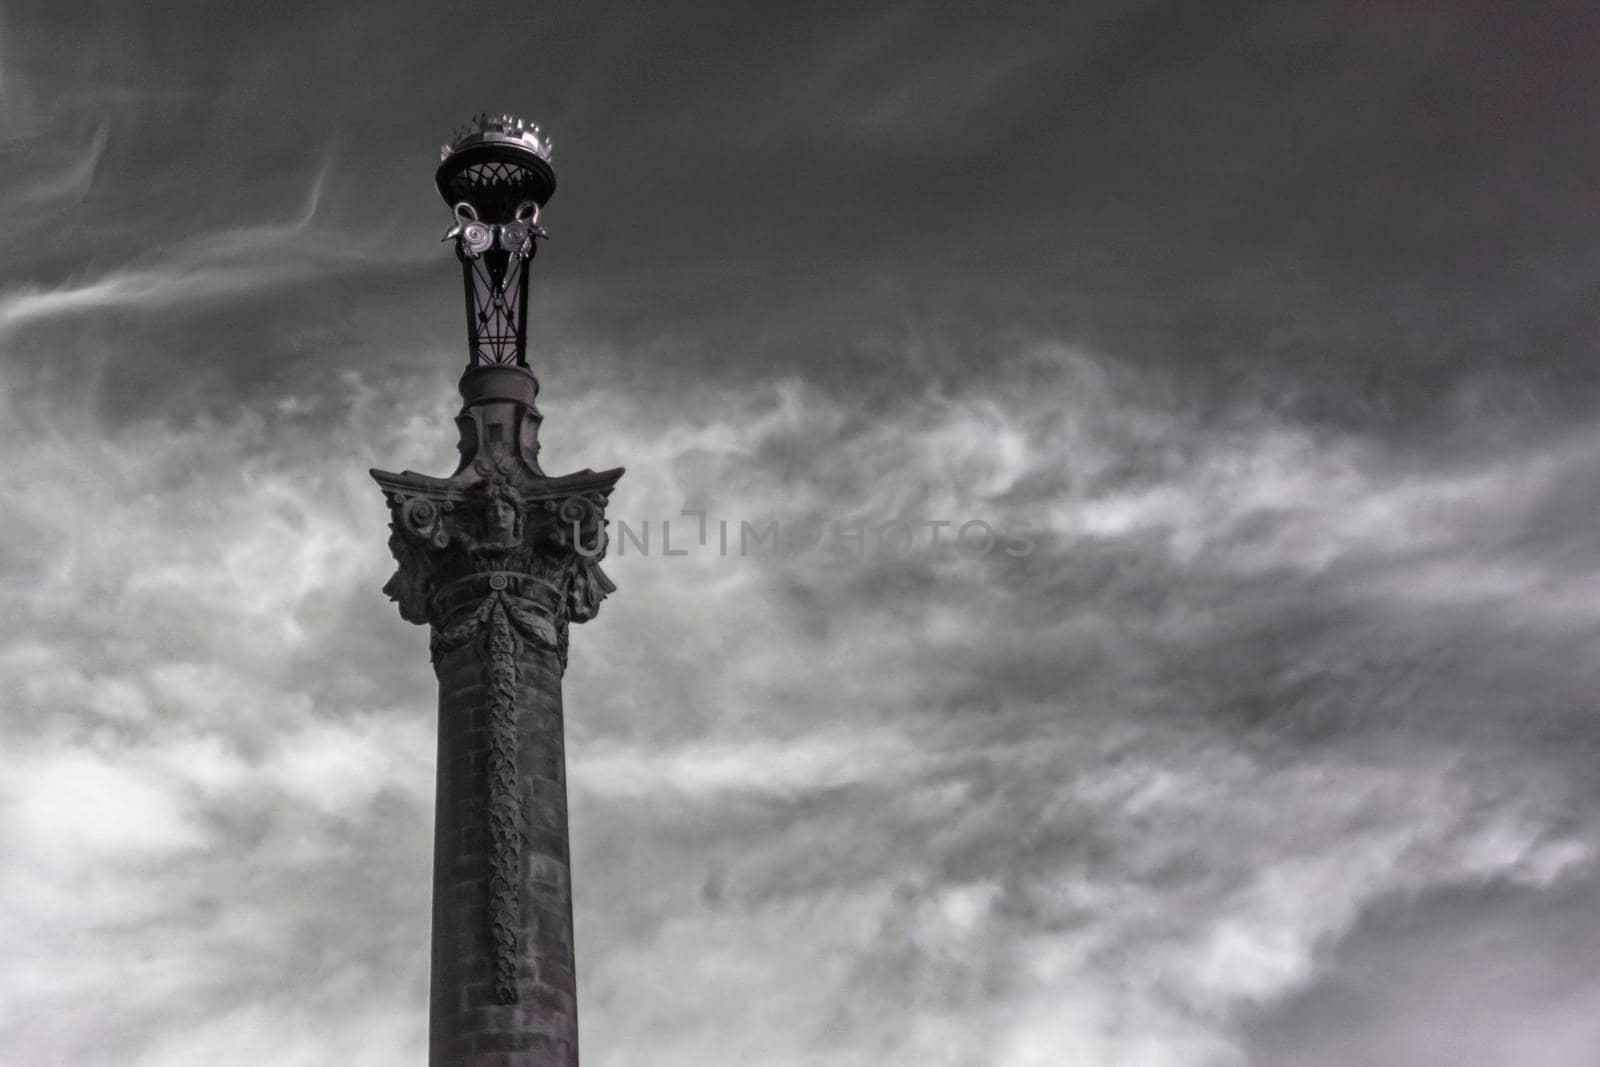 Black and white, moody infrared photograph of ornately decorated tower framed by dramatic cirrus clouds Yorkshire, England, UK